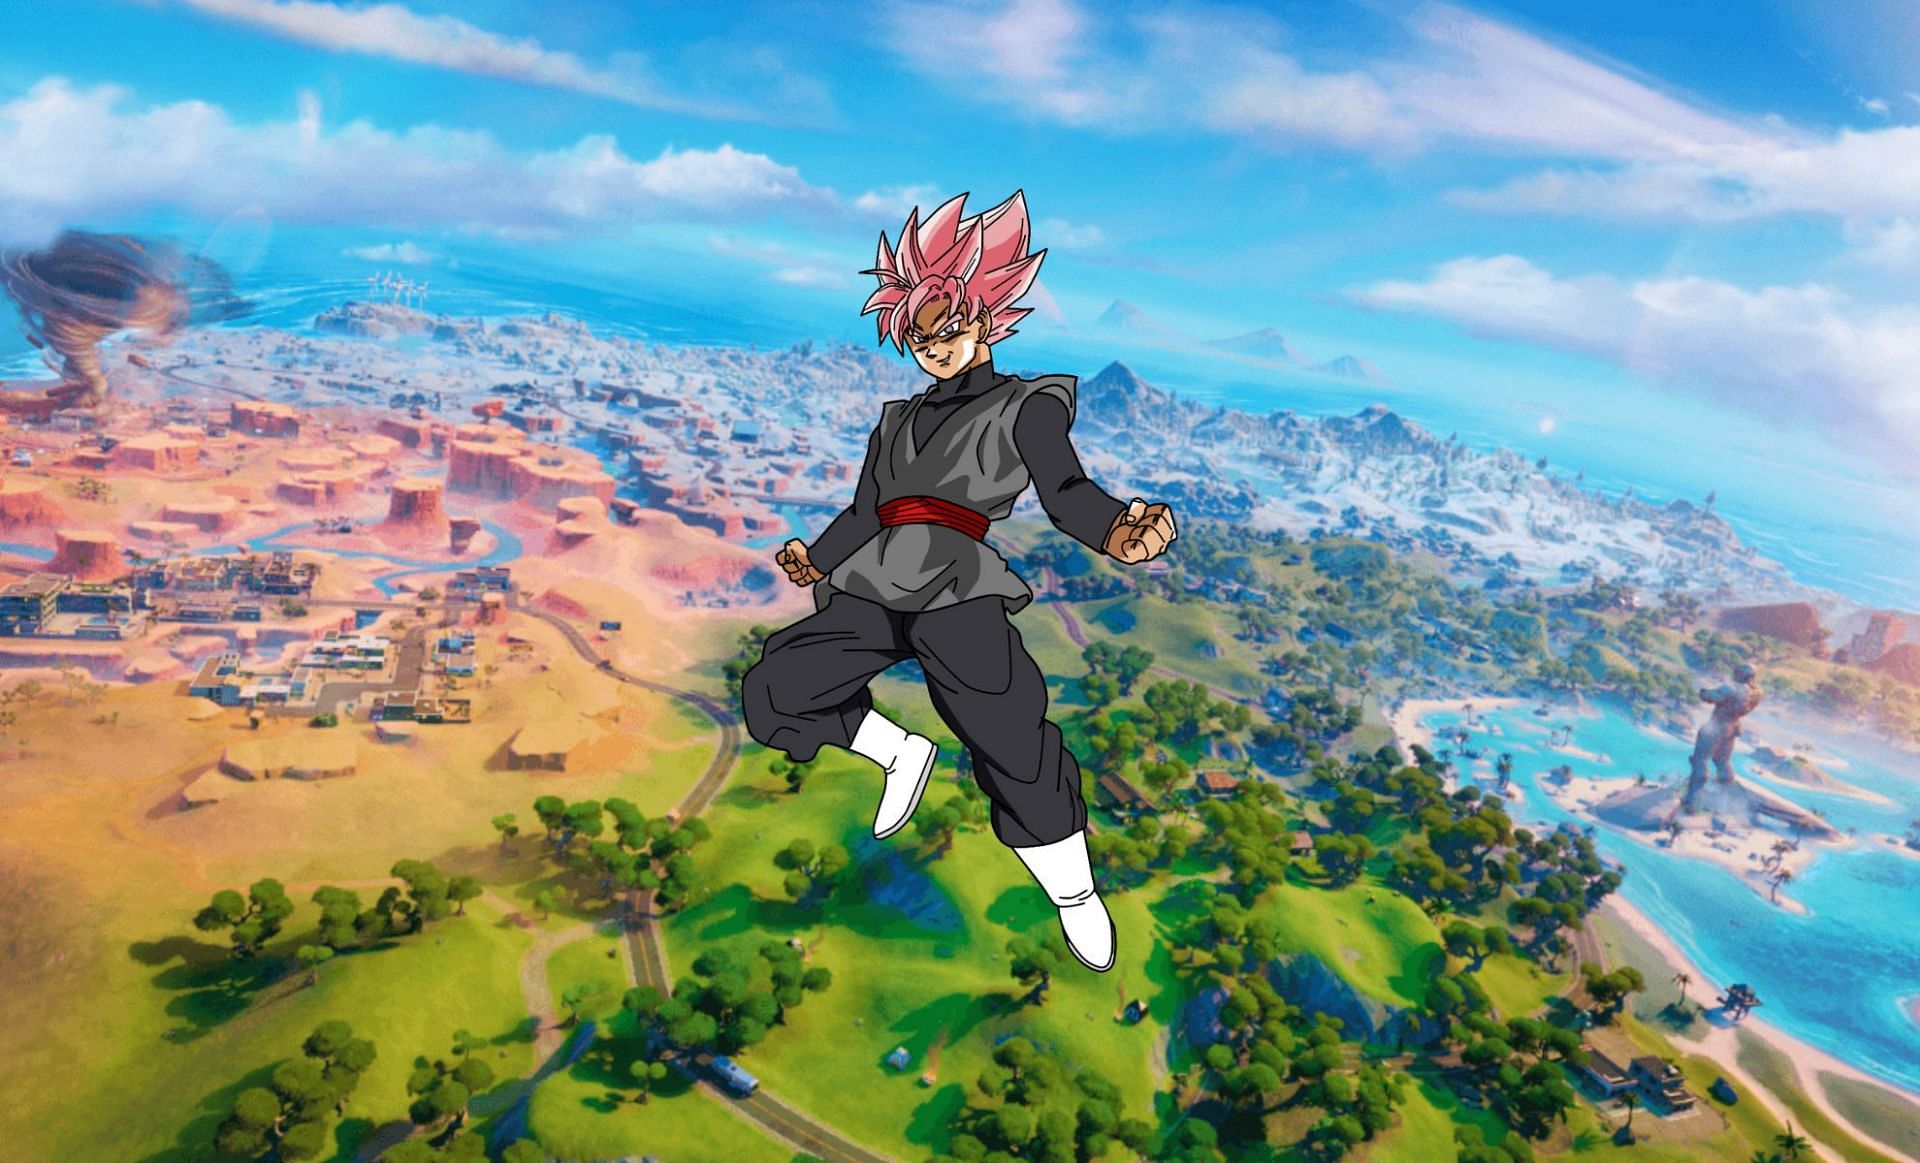 First glance at the Goku Black skin for Fortnite